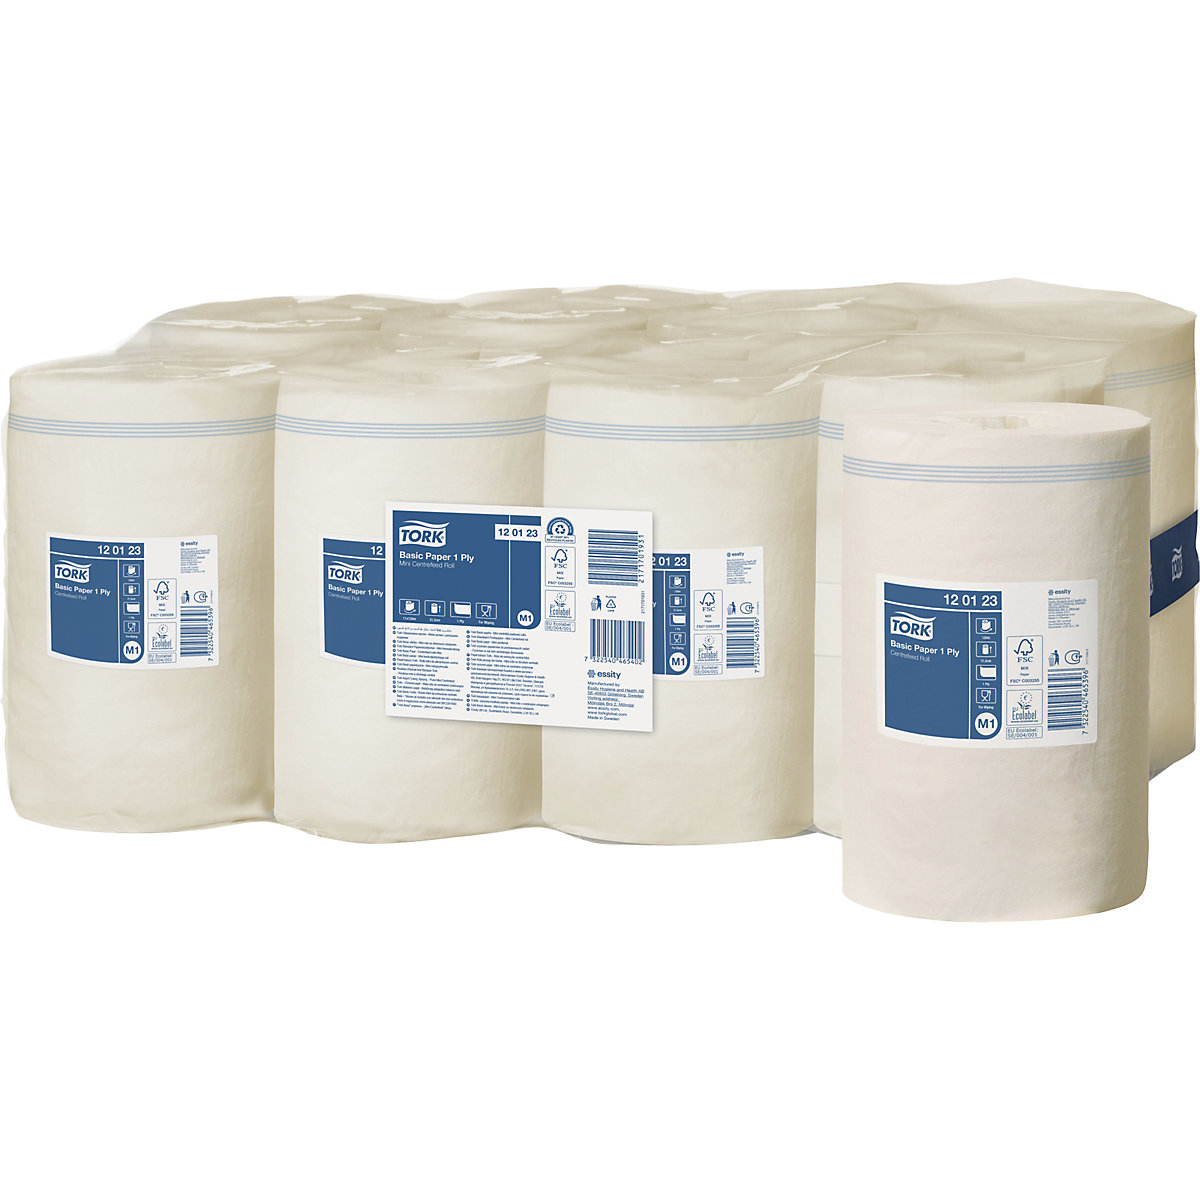 Standard centrefeed paper wipes – TORK